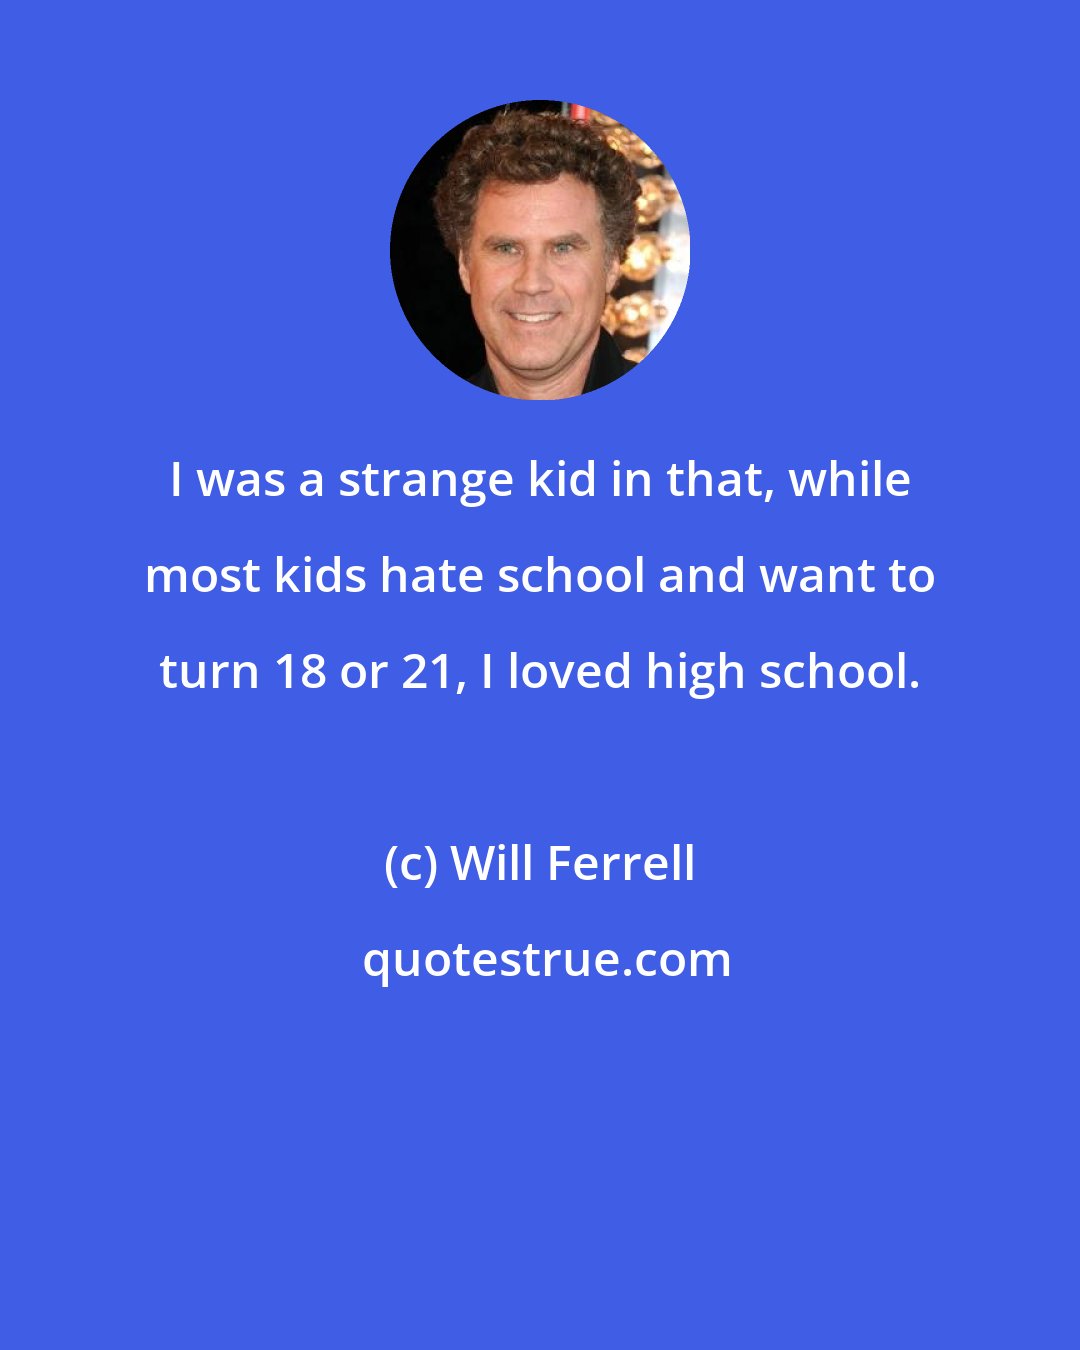 Will Ferrell: I was a strange kid in that, while most kids hate school and want to turn 18 or 21, I loved high school.